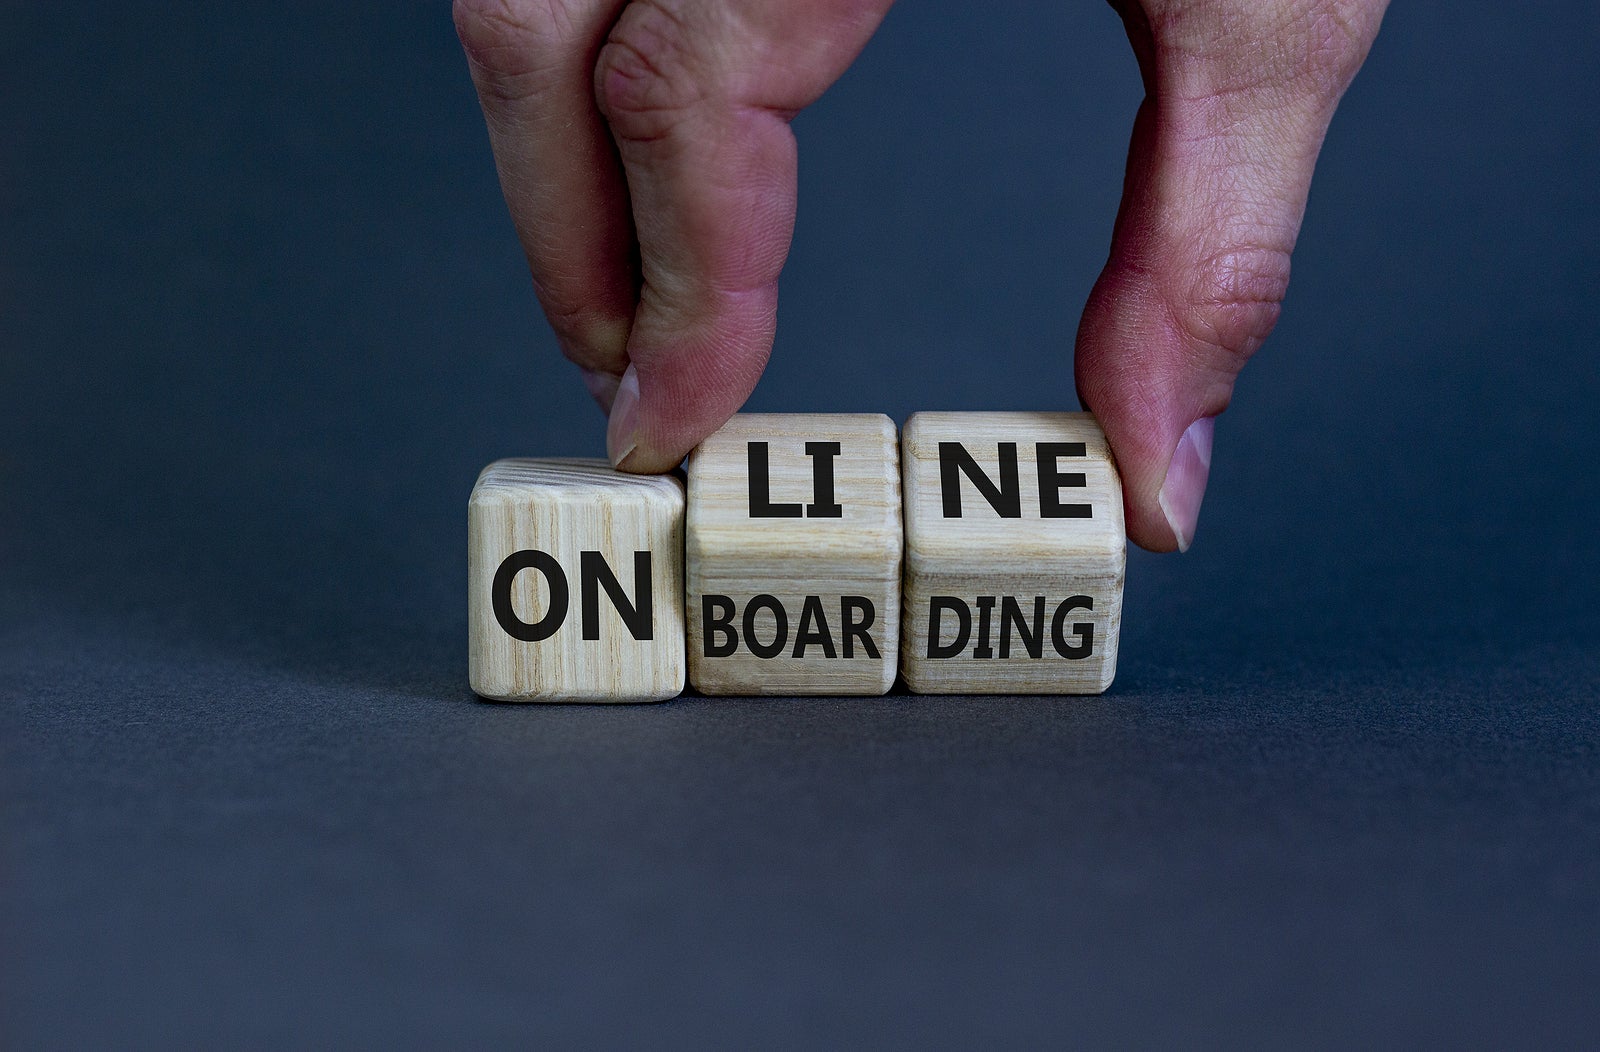 Online onboarding symbol. Businessman turns wooden cubes with words 'online onboarding'. Beautiful yellow table, white background, copy space. Business, online onboarding concept.